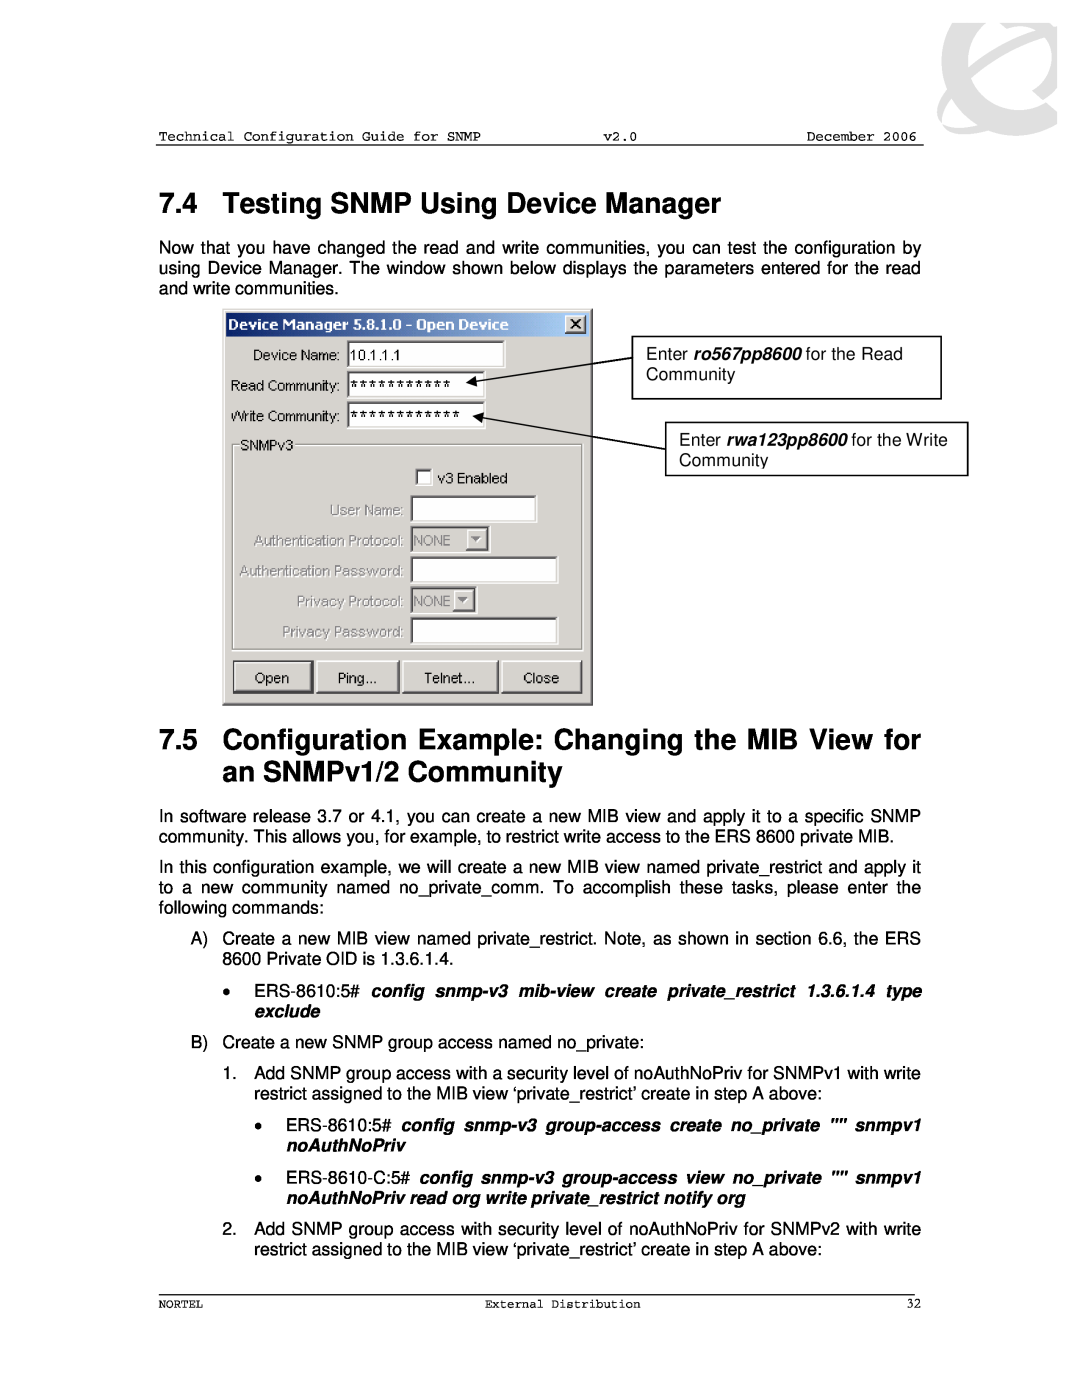 Nortel Networks 8600 manual Testing SNMP Using Device Manager 